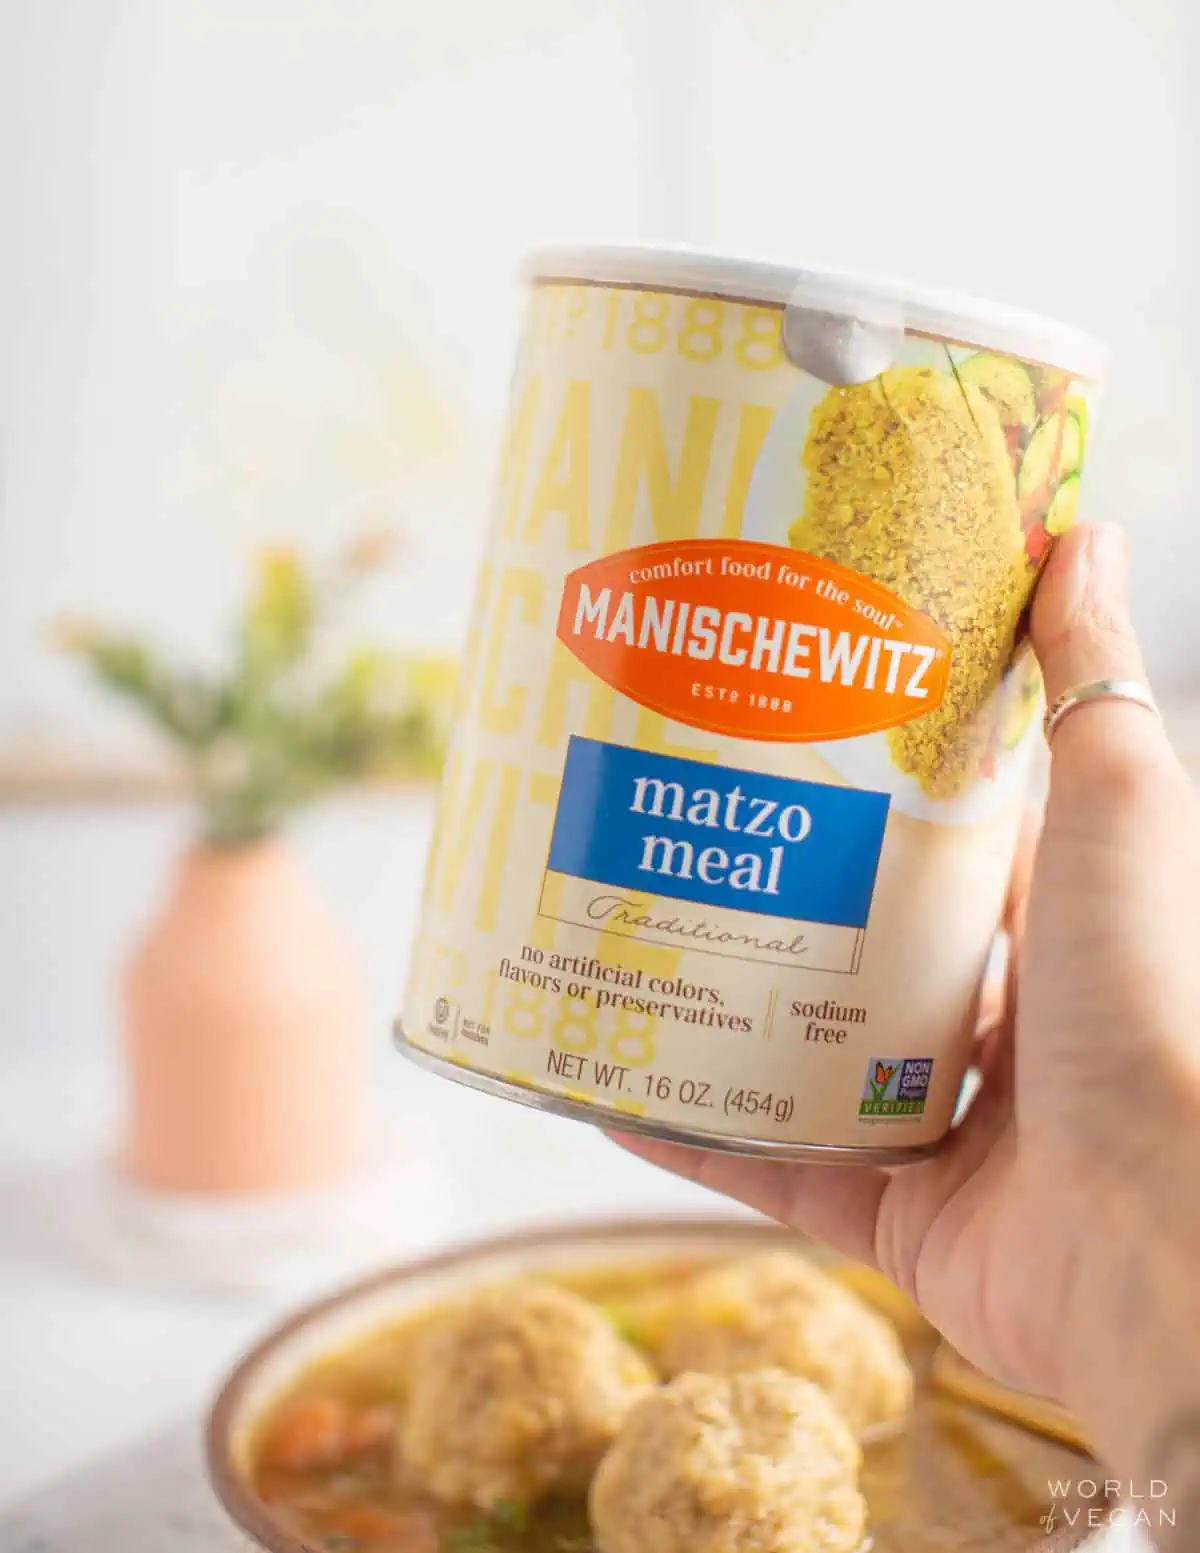 Woman holding up a container of matzo meal from the brand Manischewitz. 